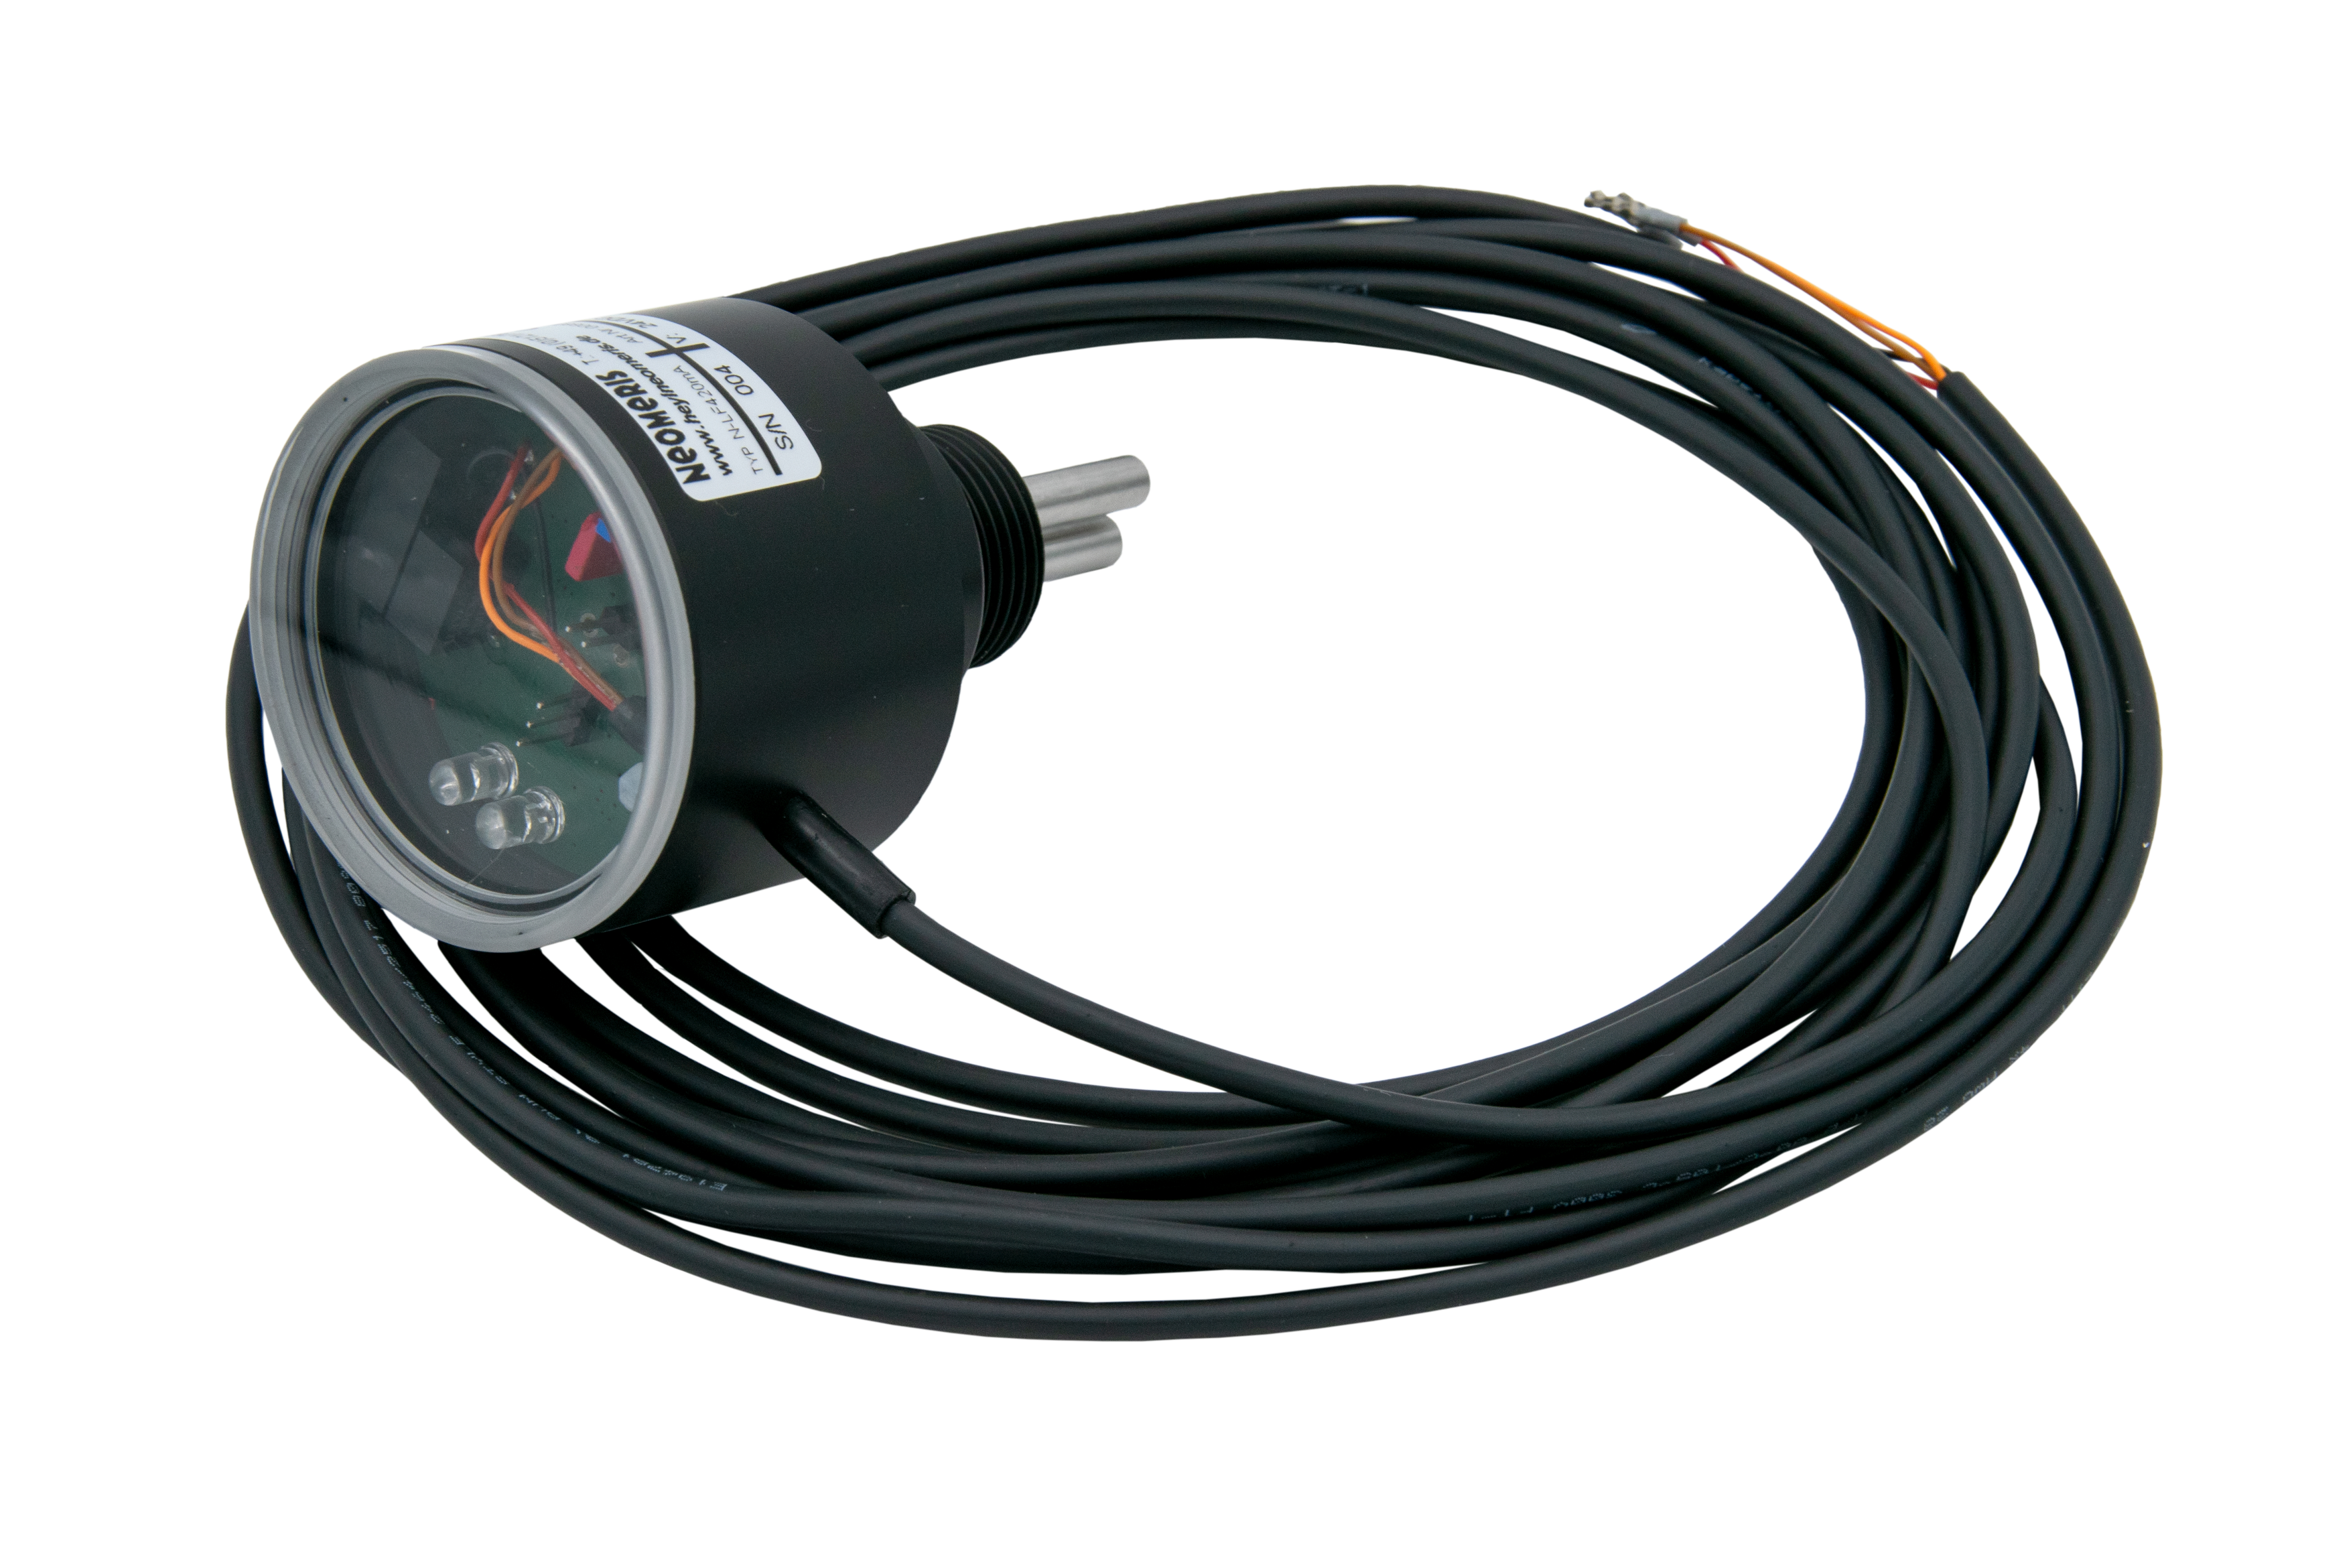 N-LF420 0-50µS conductivity meter with 4-20mA output, LED display and screw-in thread as required